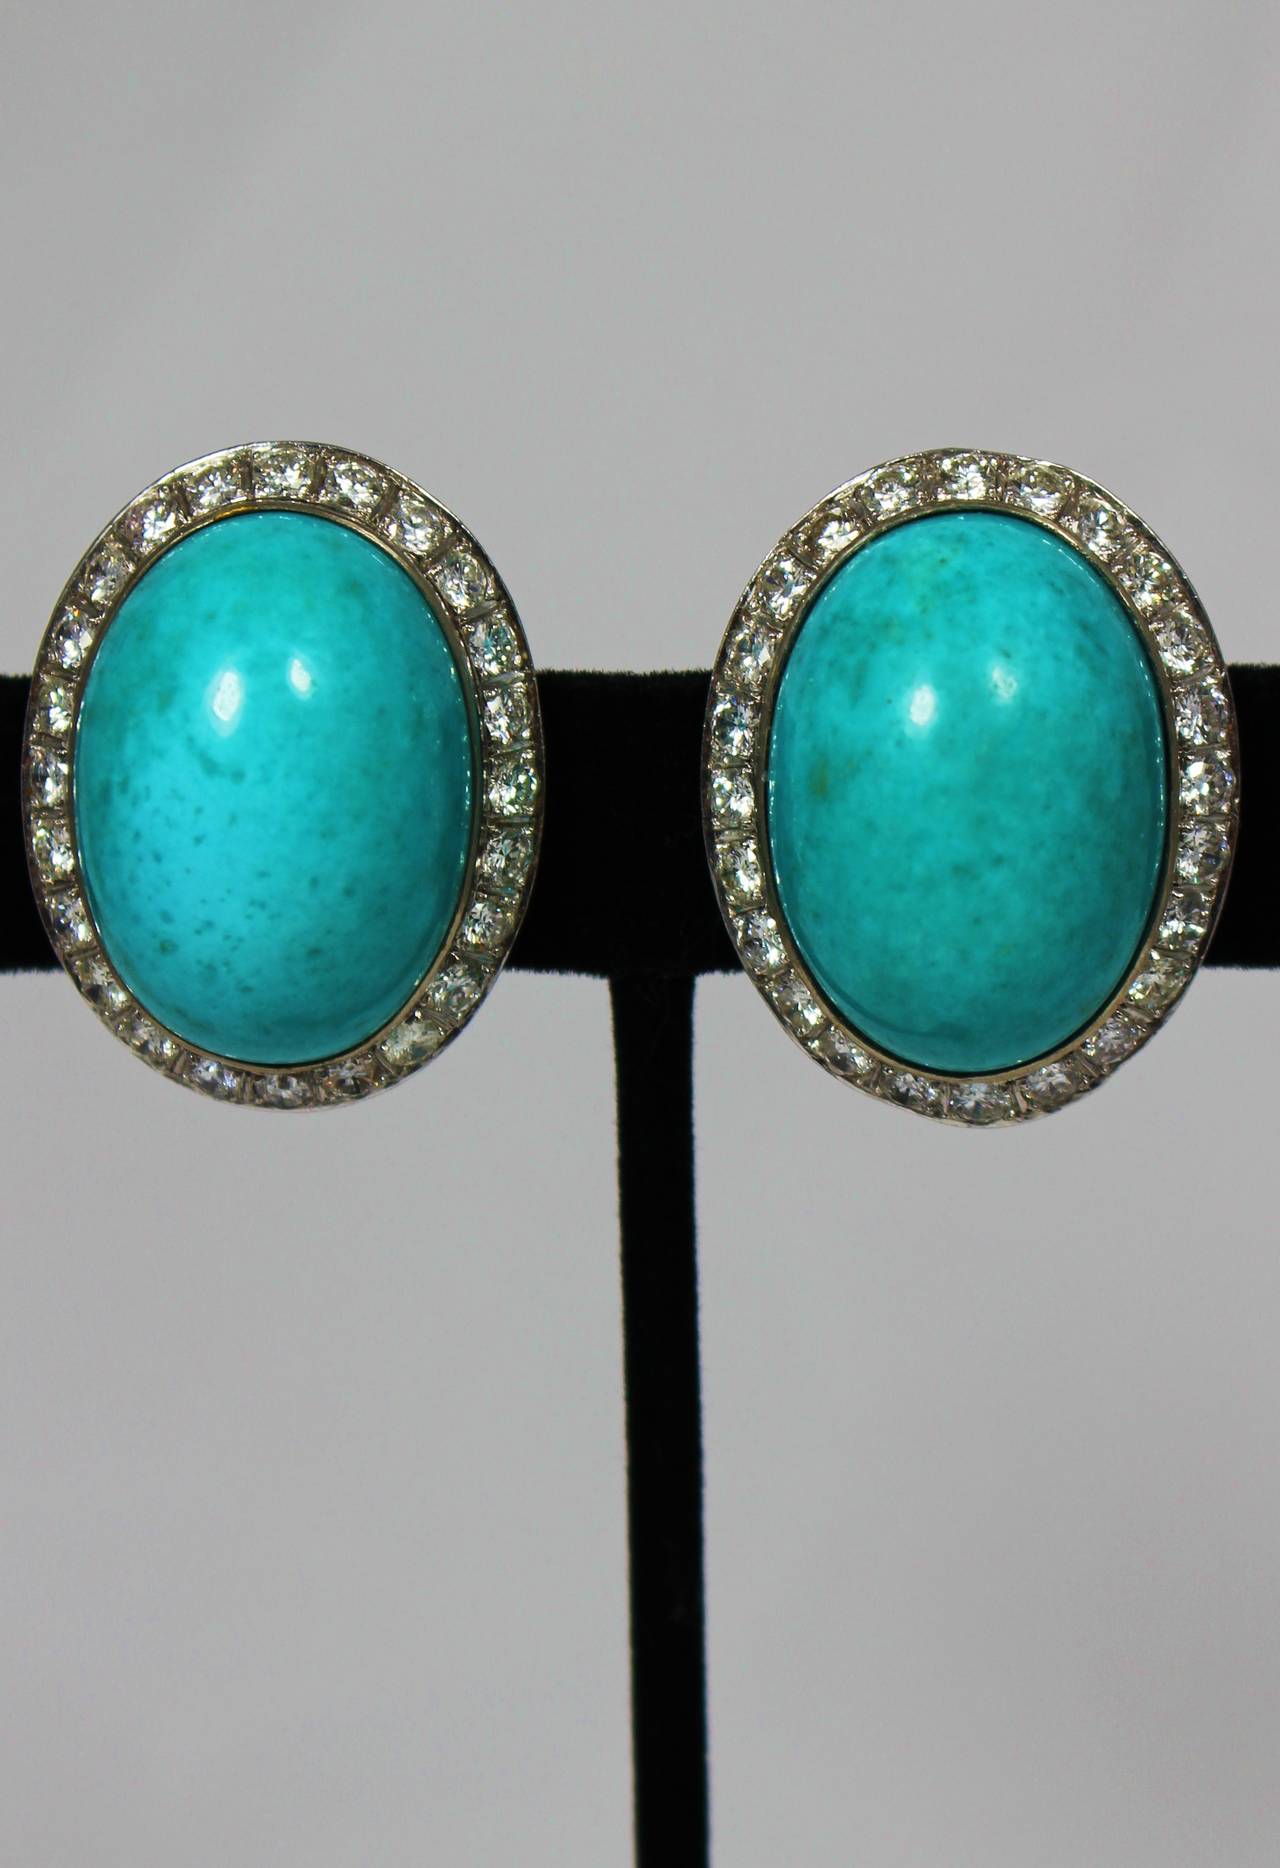 Brilliant Cut Turquoise Diamond Necklace, Earrings and Cocktail Ring Parure For Sale